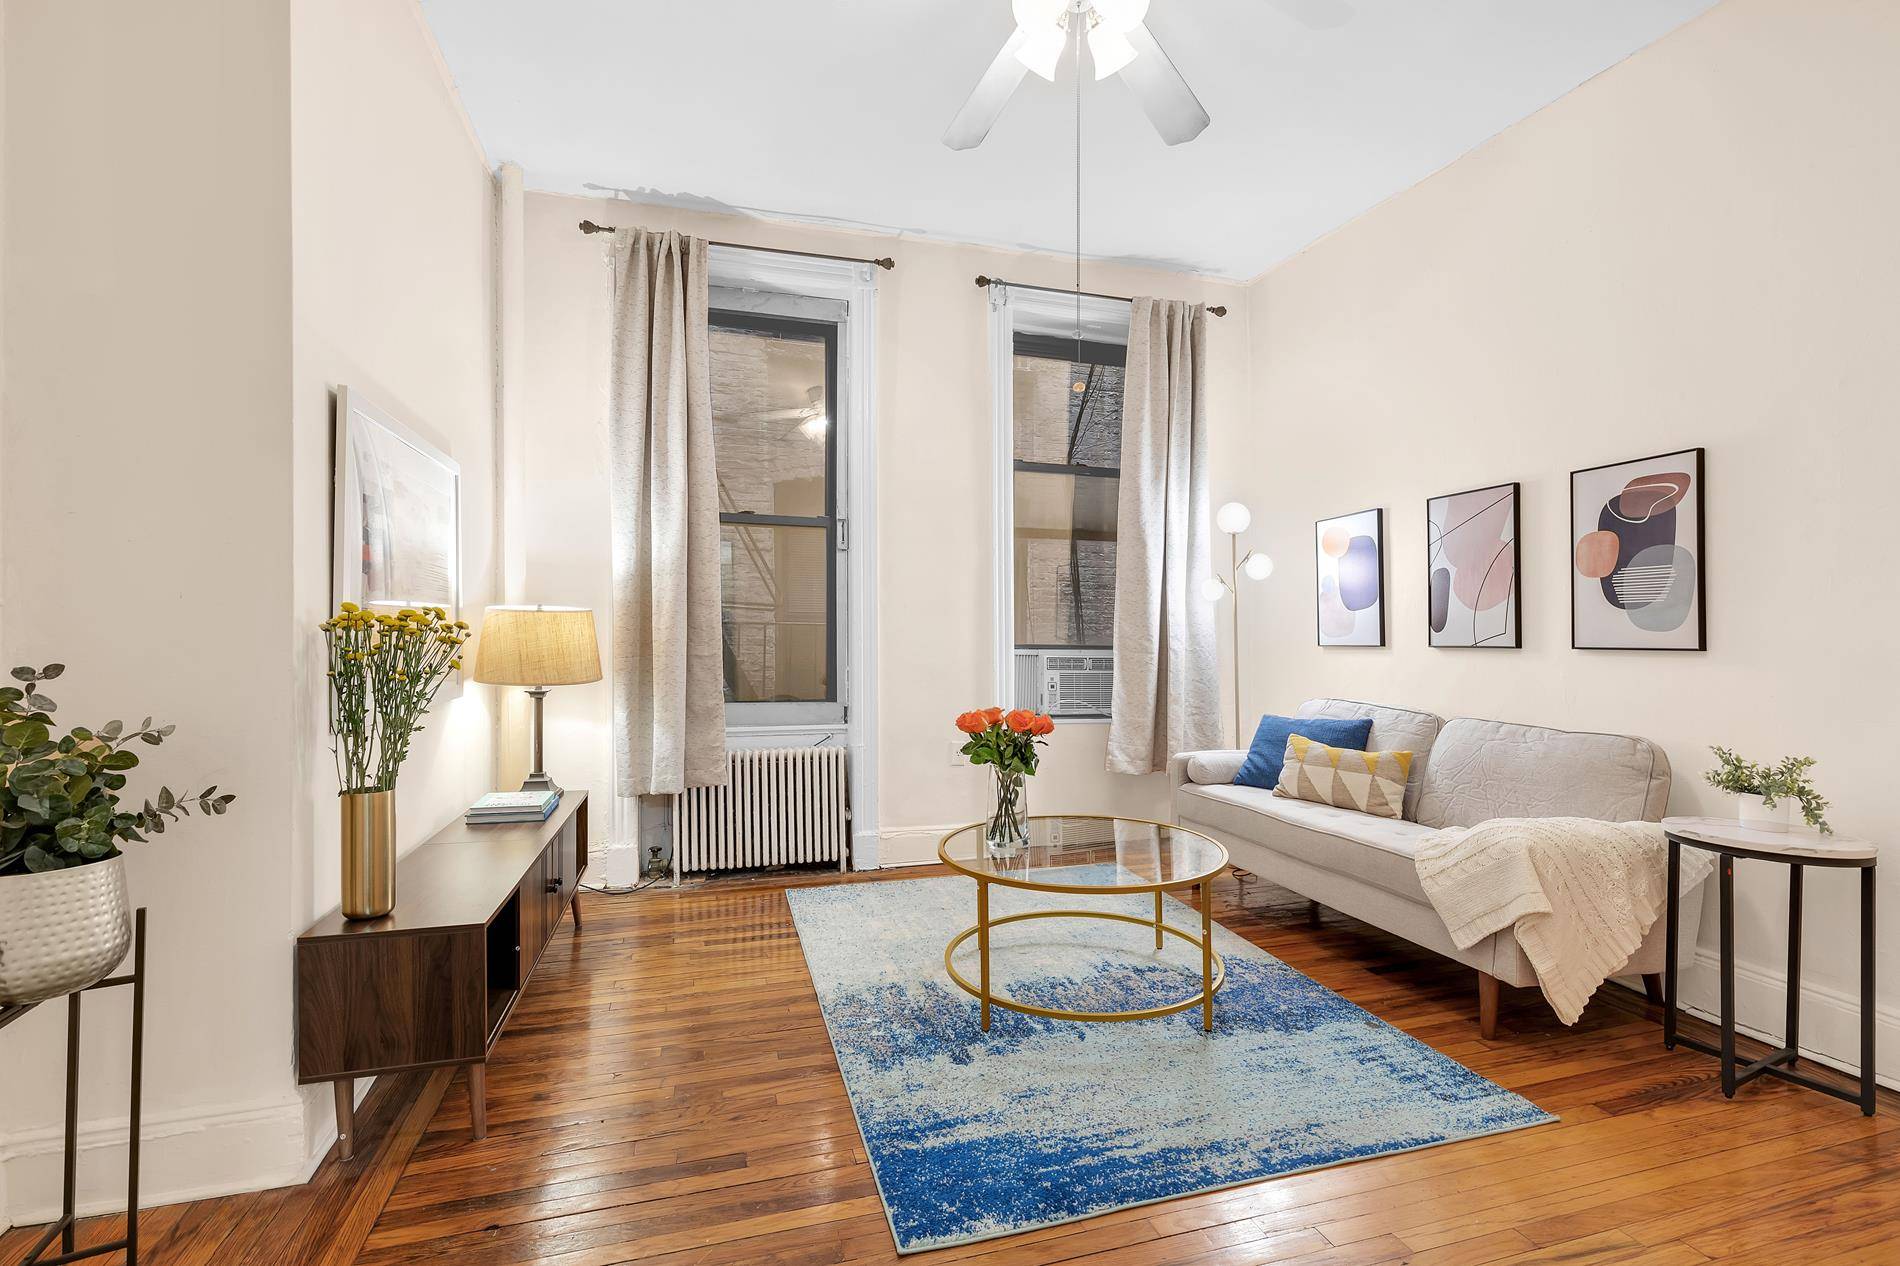 Welcome home to this spacious, well priced one bedroom in the middle of one of Manhattan s most vibrant neighborhoods.